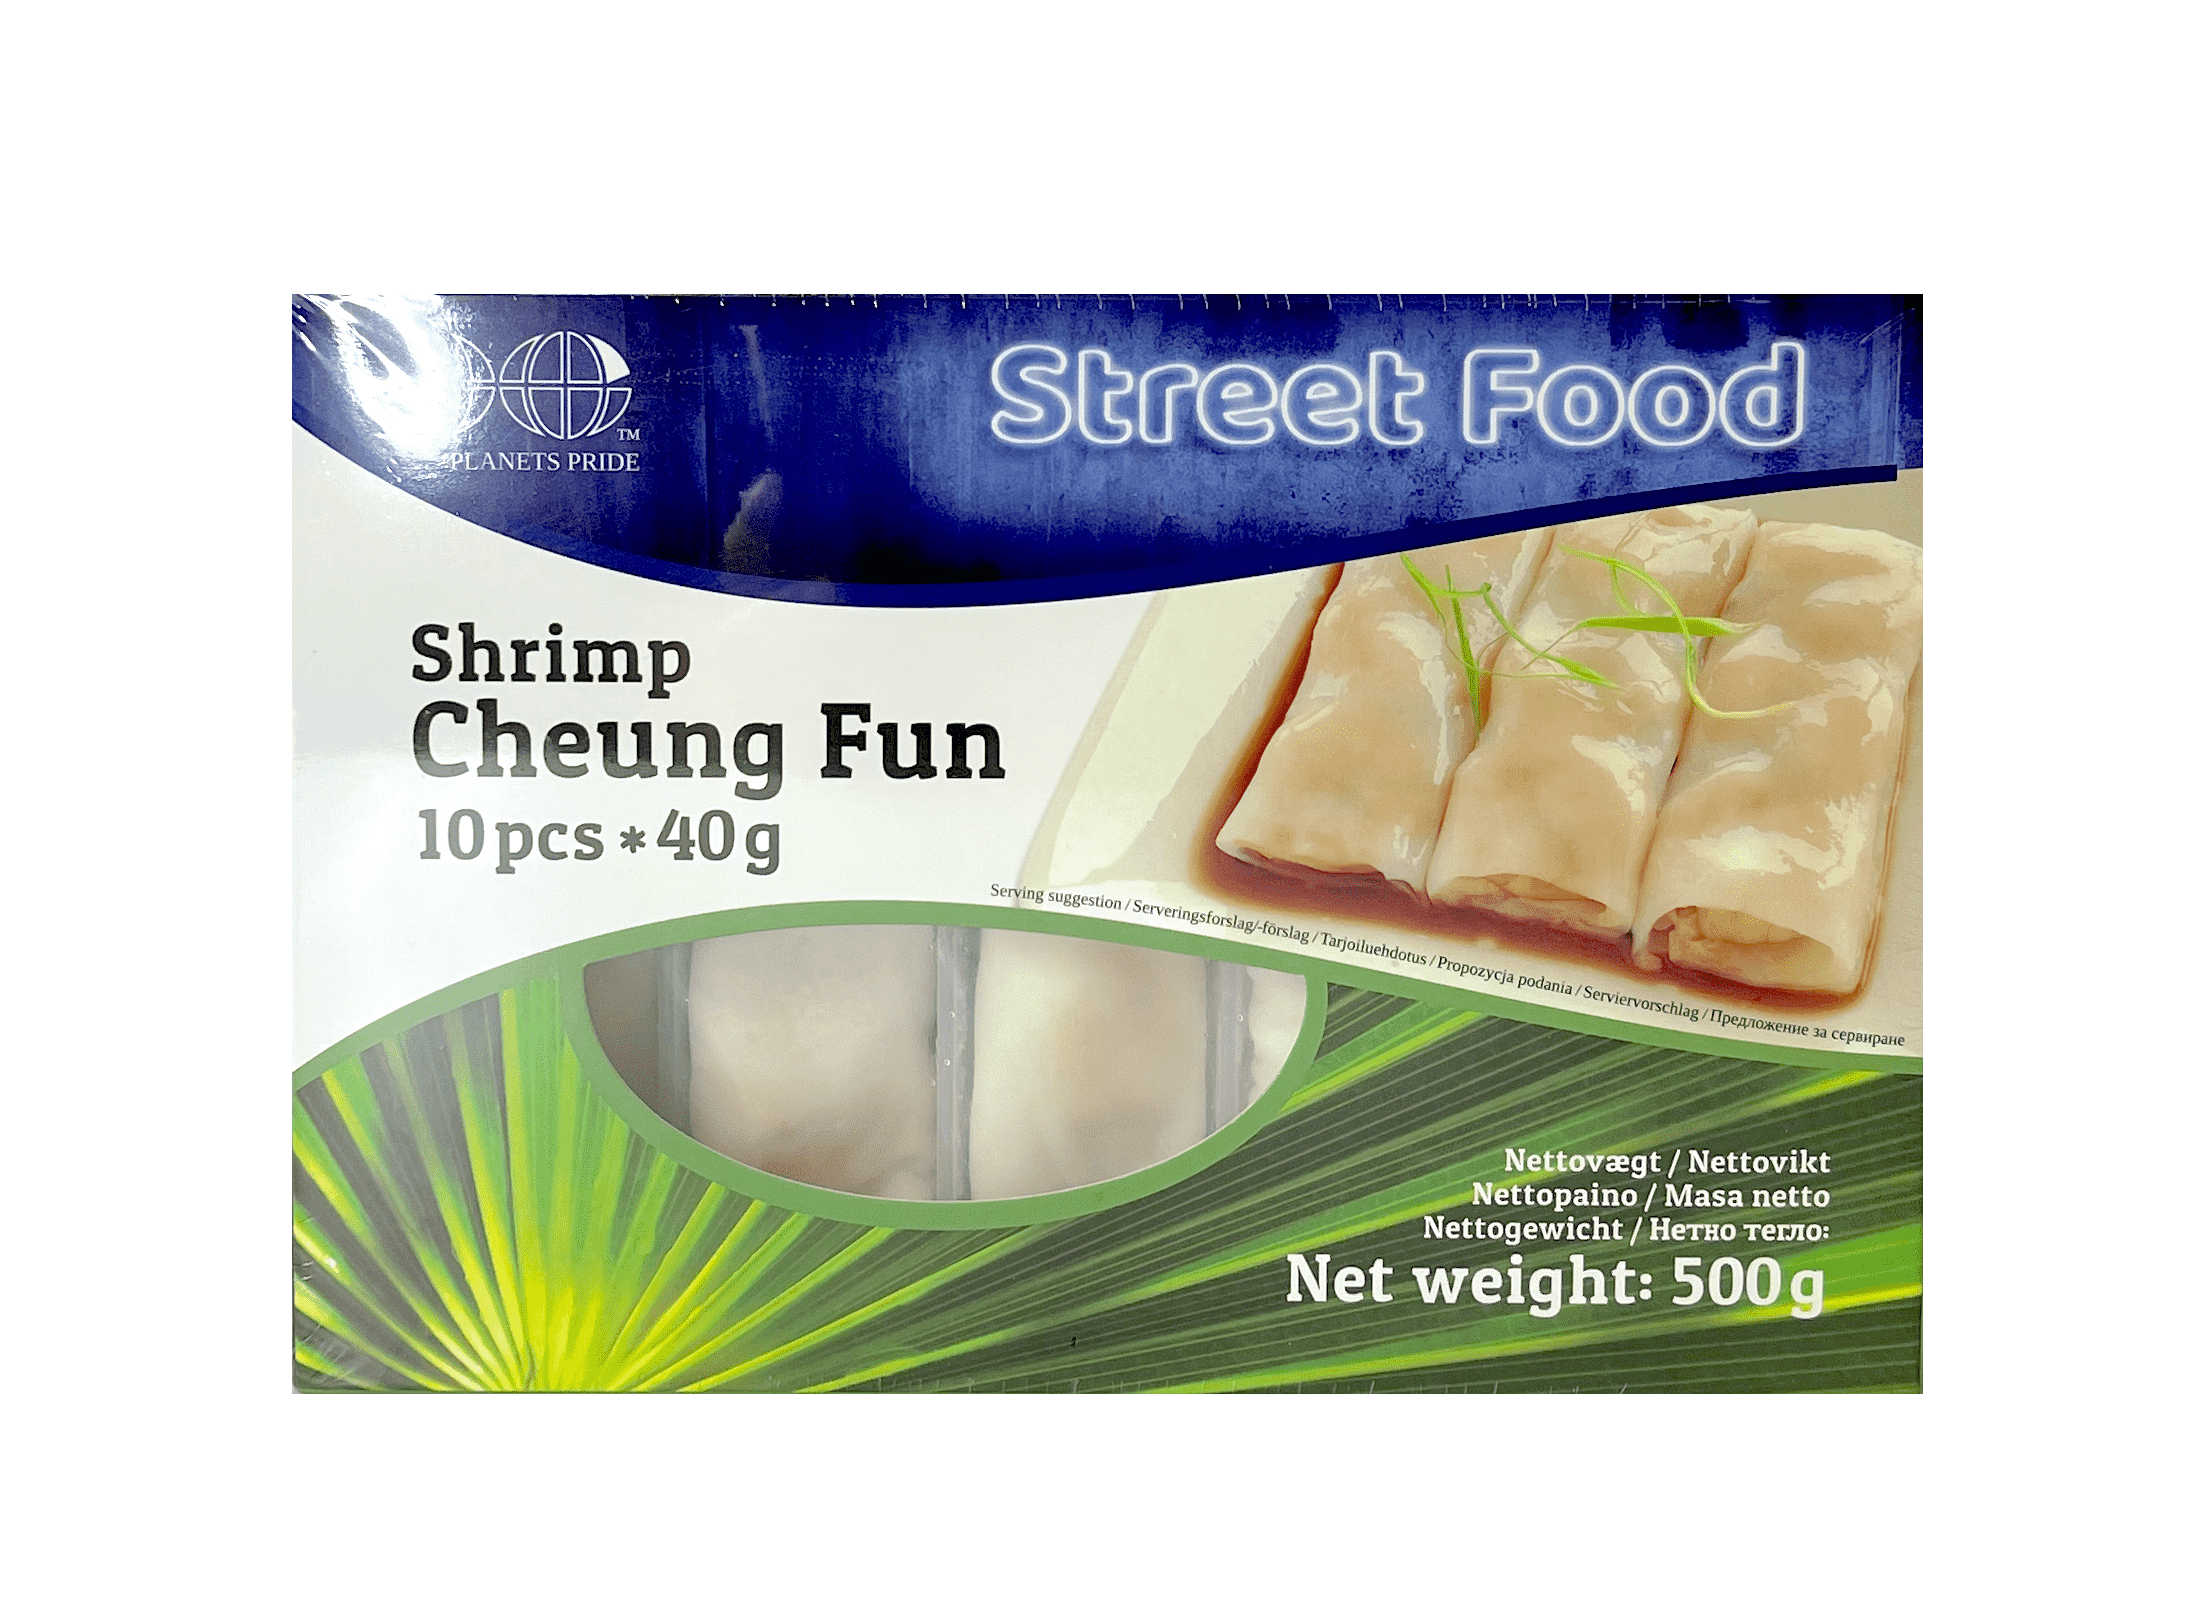 Rice Dough With Shrimp Filling Fryst 500g Planets Pride Vietnam